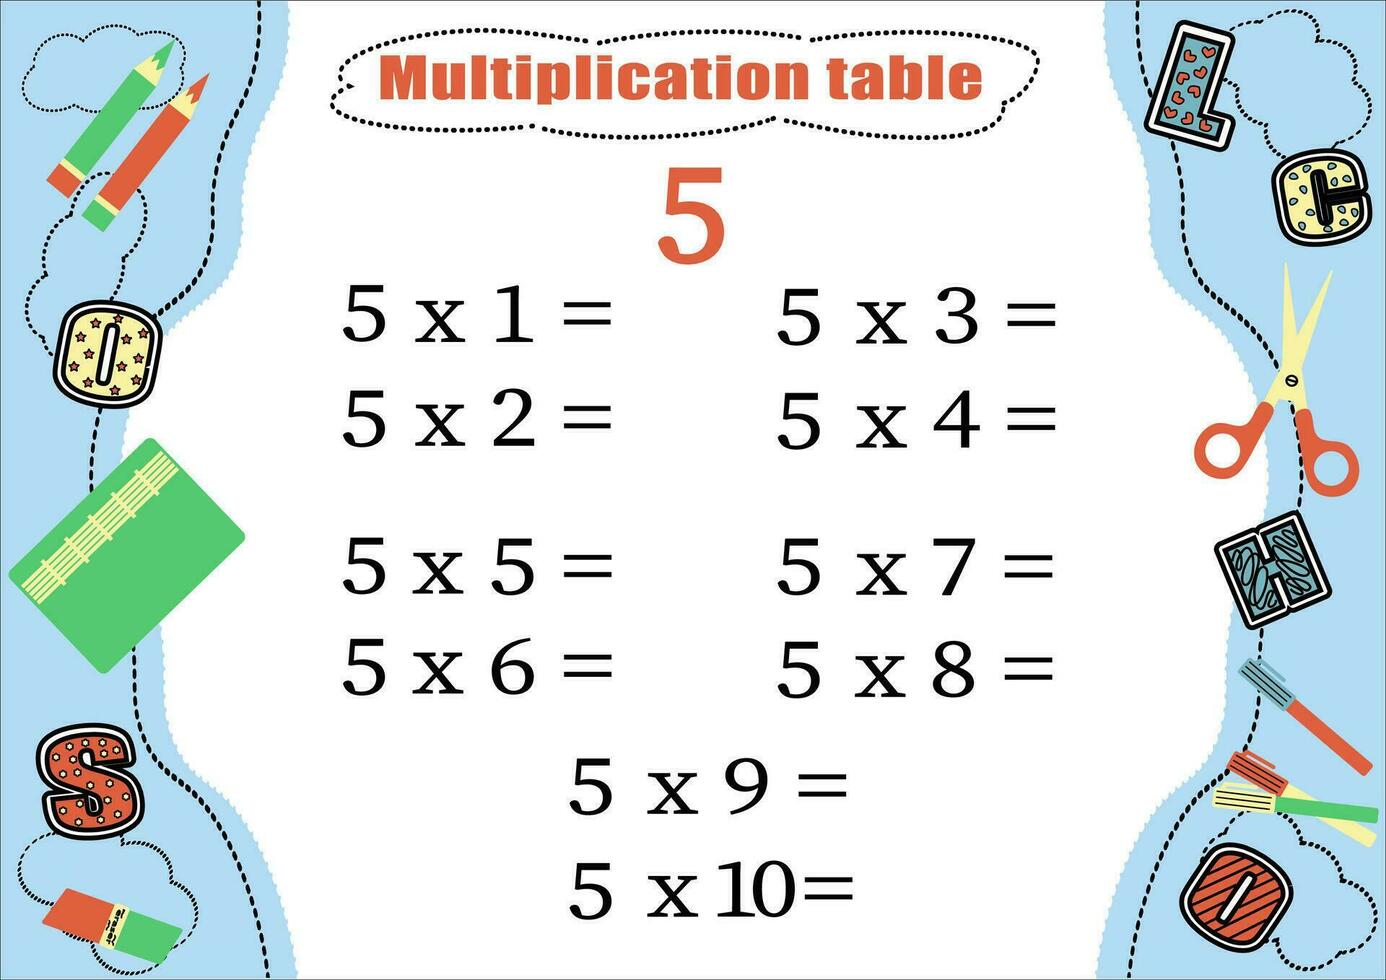 Multiplication table by 5 with a task to consolidate knowledge of multiplication. Colorful cartoon multiplication table vector for teaching math. School stationery. EPS10